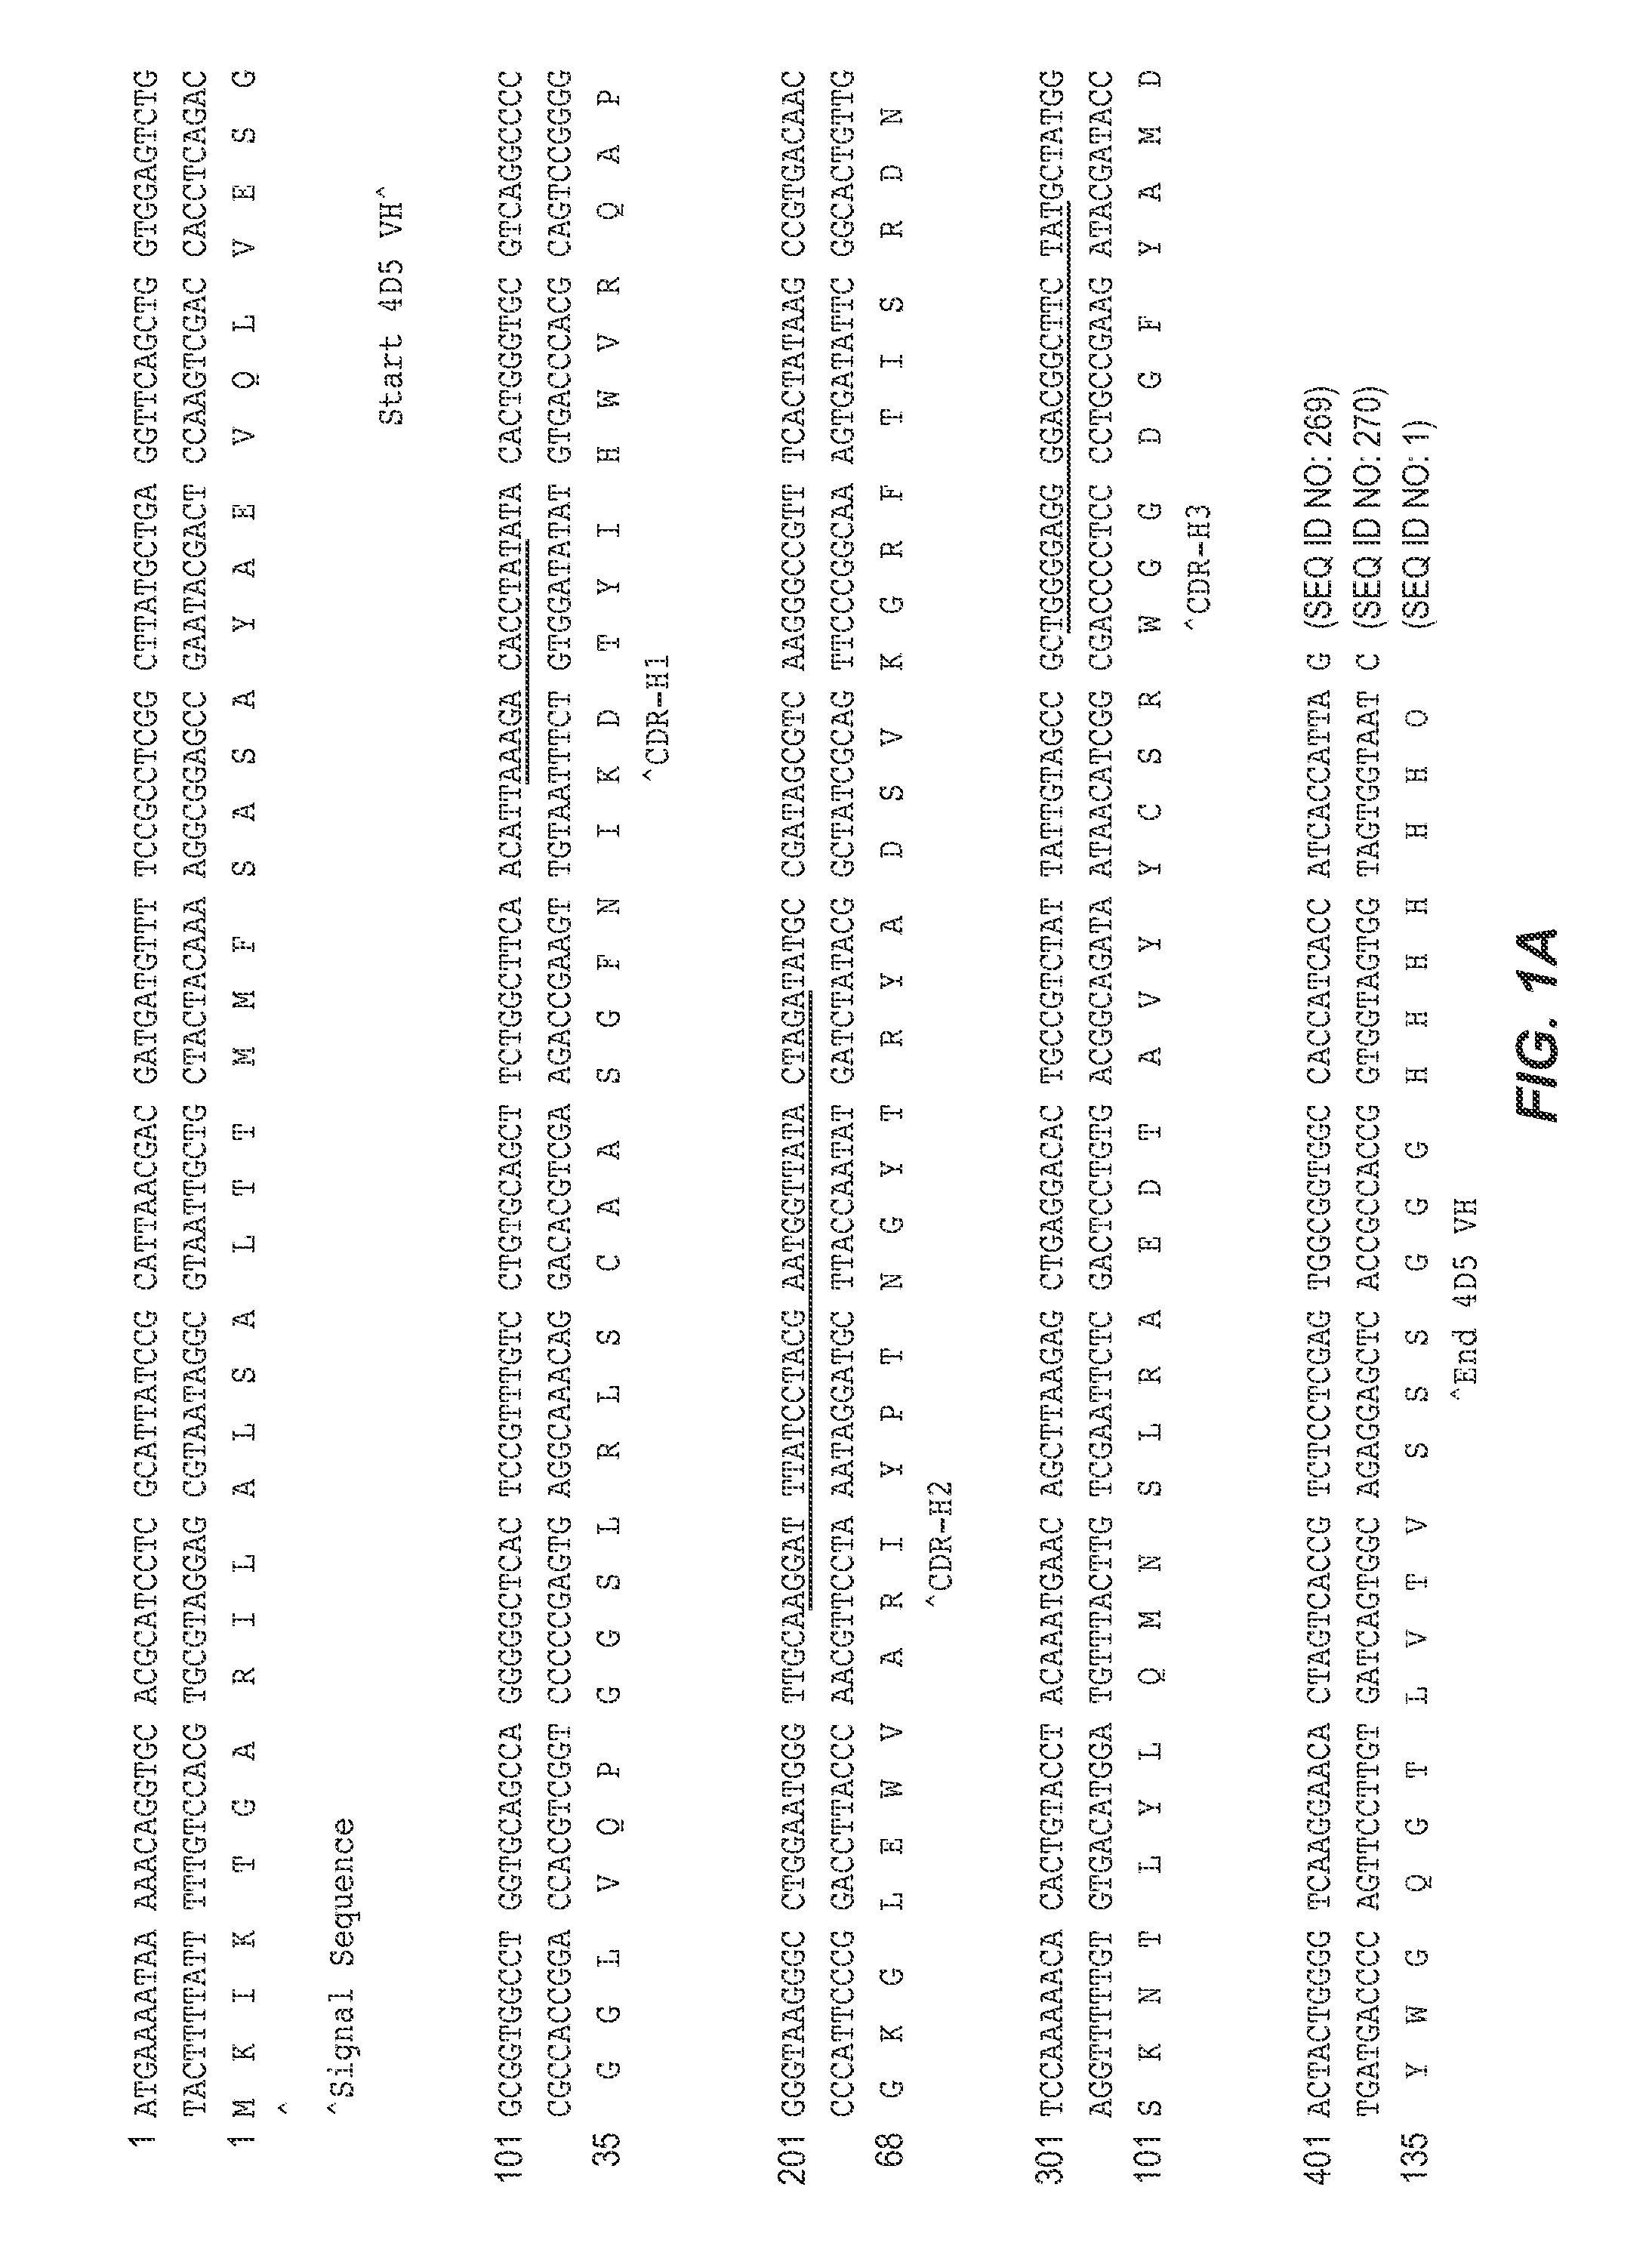 Binding polypeptides with optimized scaffolds